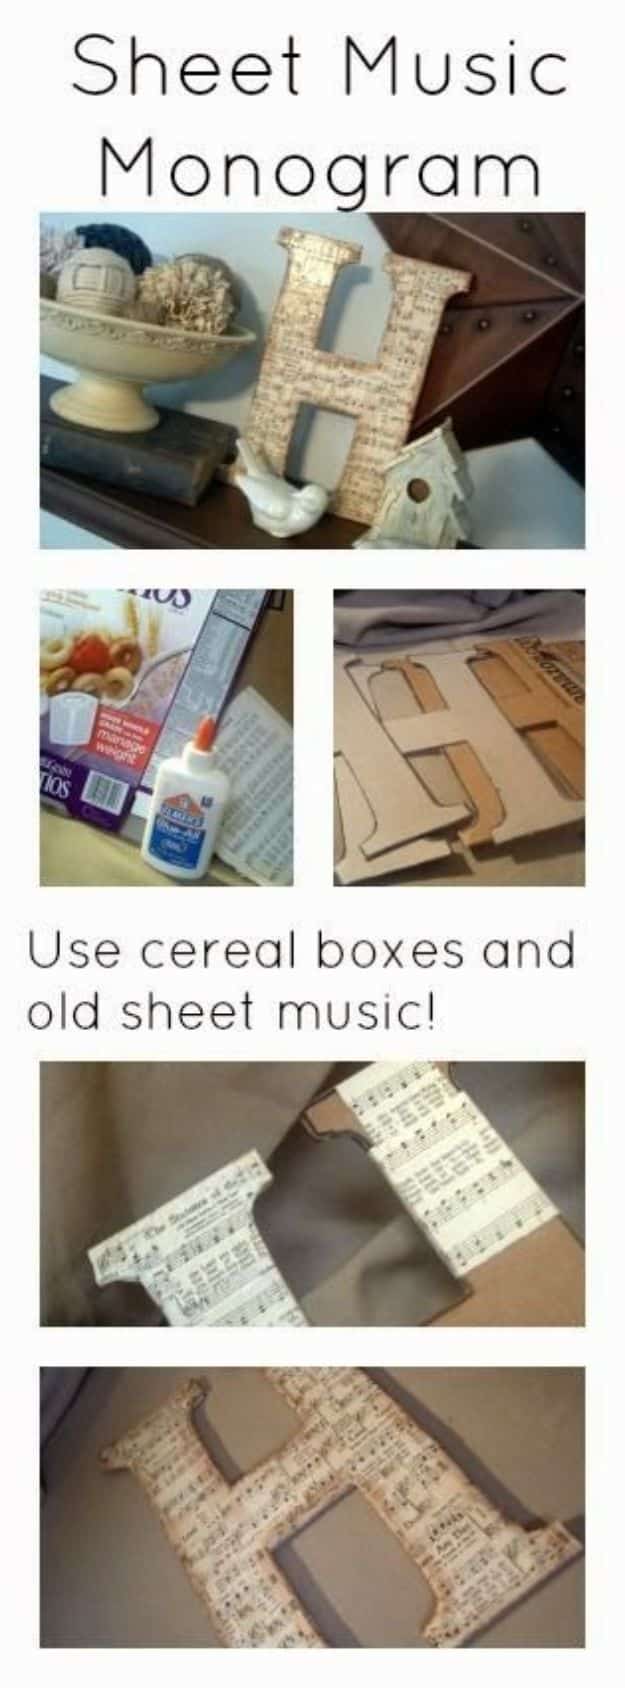 Cool DIY Ideas With Cereal Boxes - Sheet Music Monogram - Easy Organizing Ideas, Cute Kids Crafts and Creative Ways to Make Things Out of A Cereal Box - Cheap Gifts, DIY School Supplies and Storage Ideas http://diyjoy.com/diy-ideas-cereal-boxes